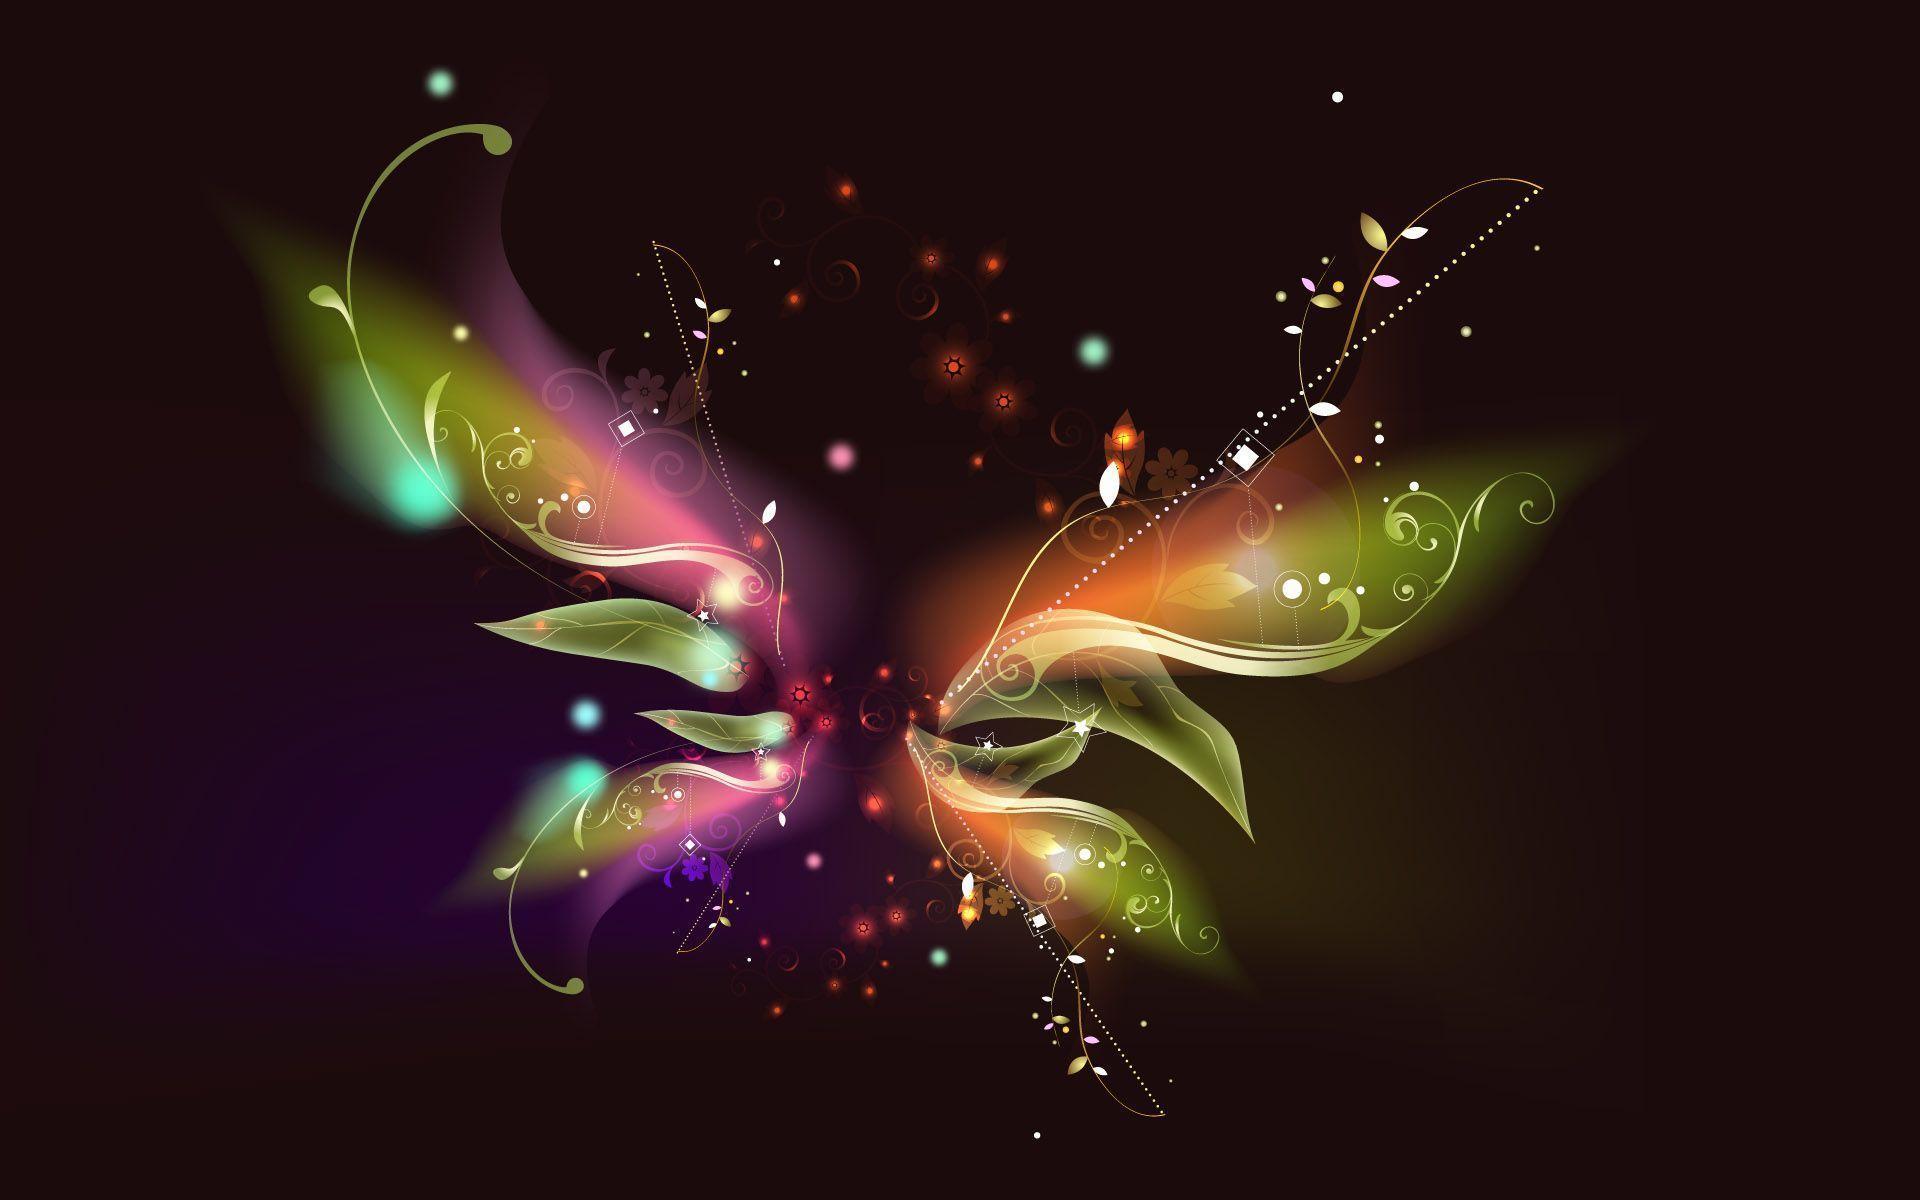 Download wallpaper: rainbow butterfly on black background